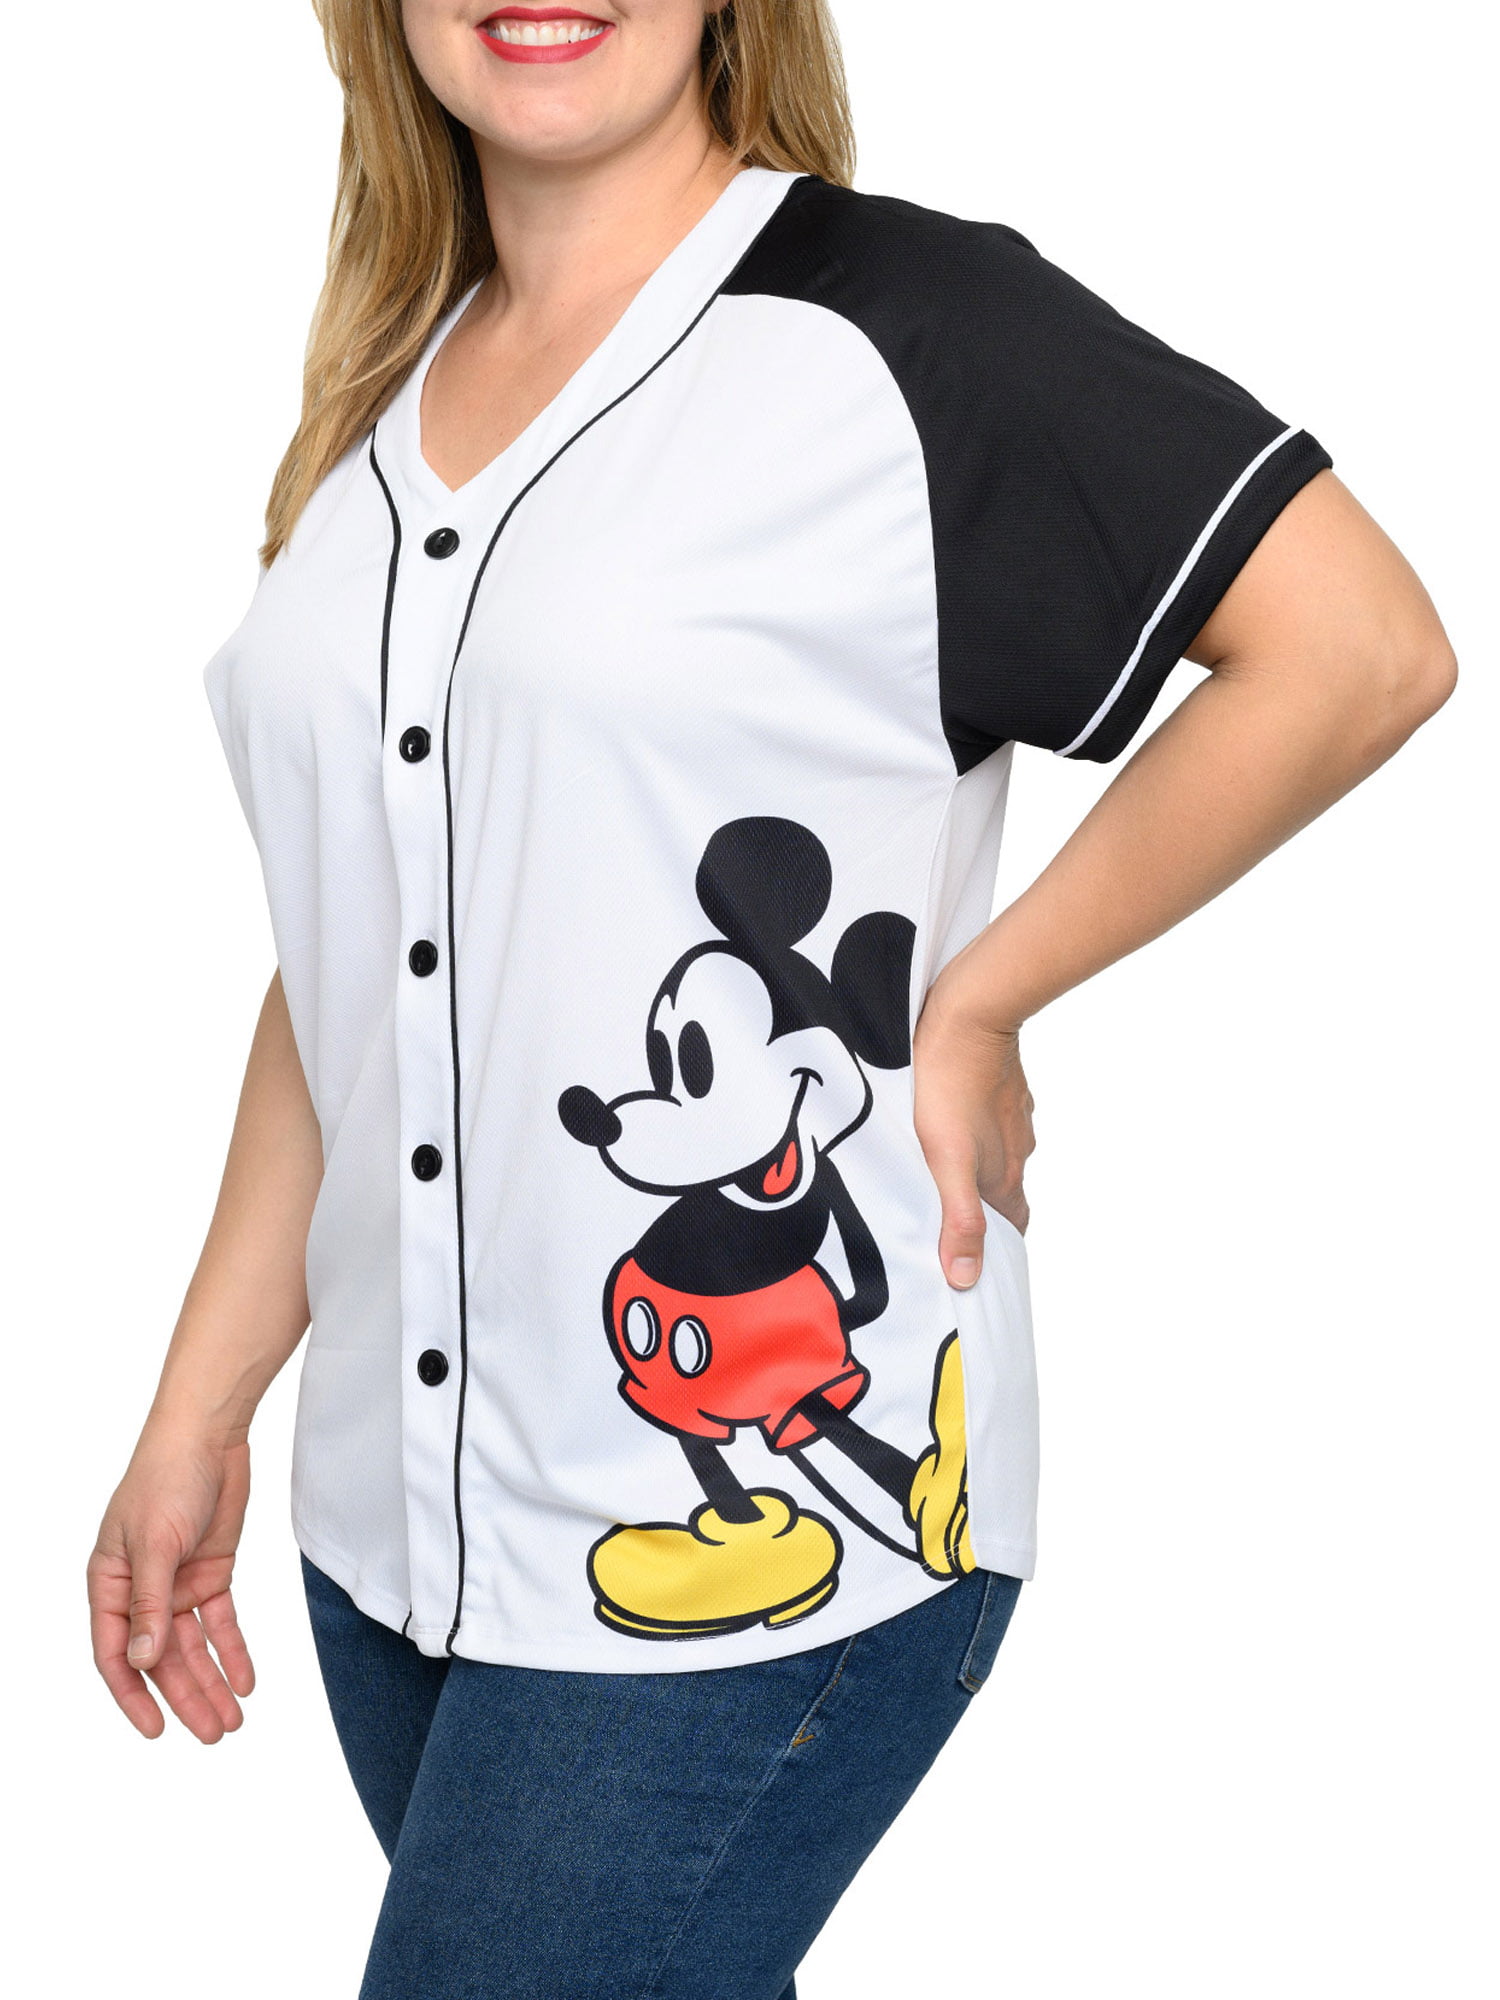 Mickey Mouse this girl loves her Dodgers and Disney Baseball shirt